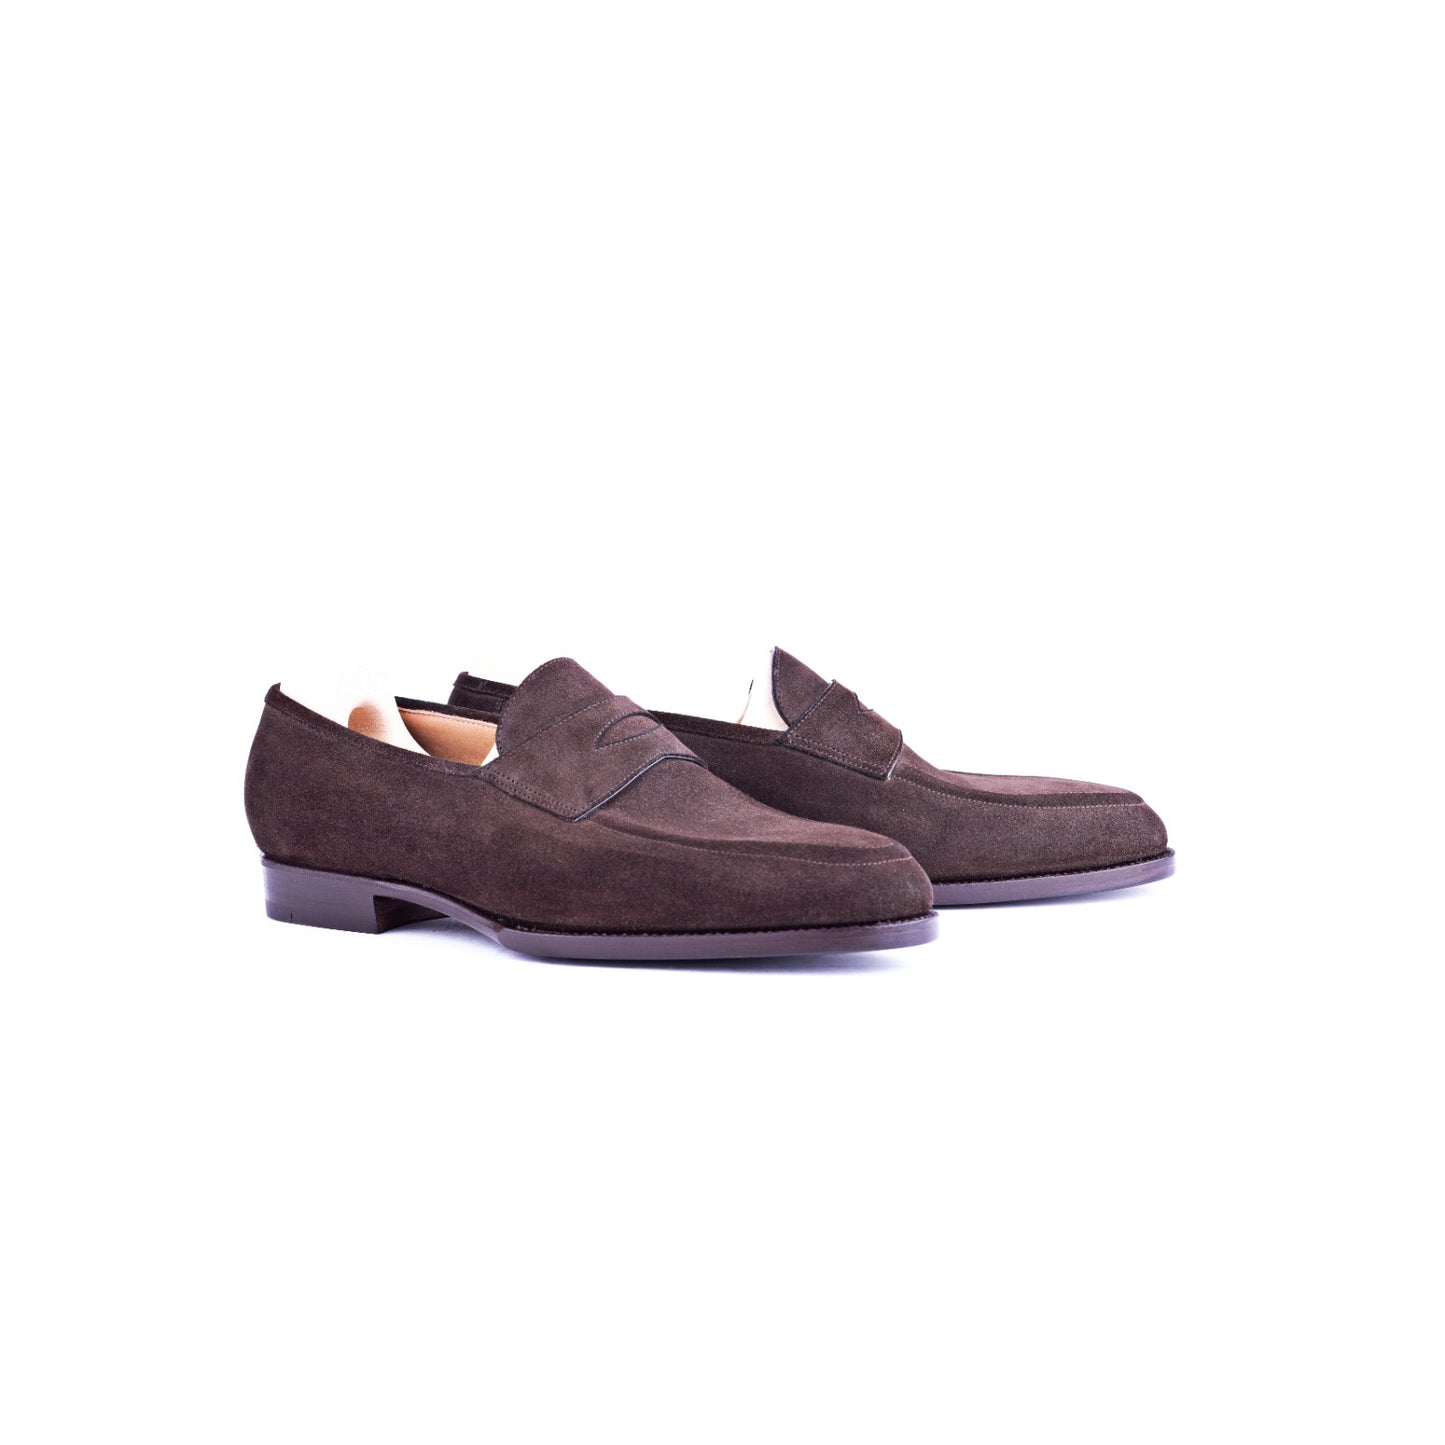 The Picadilly loafer with accentuated apron